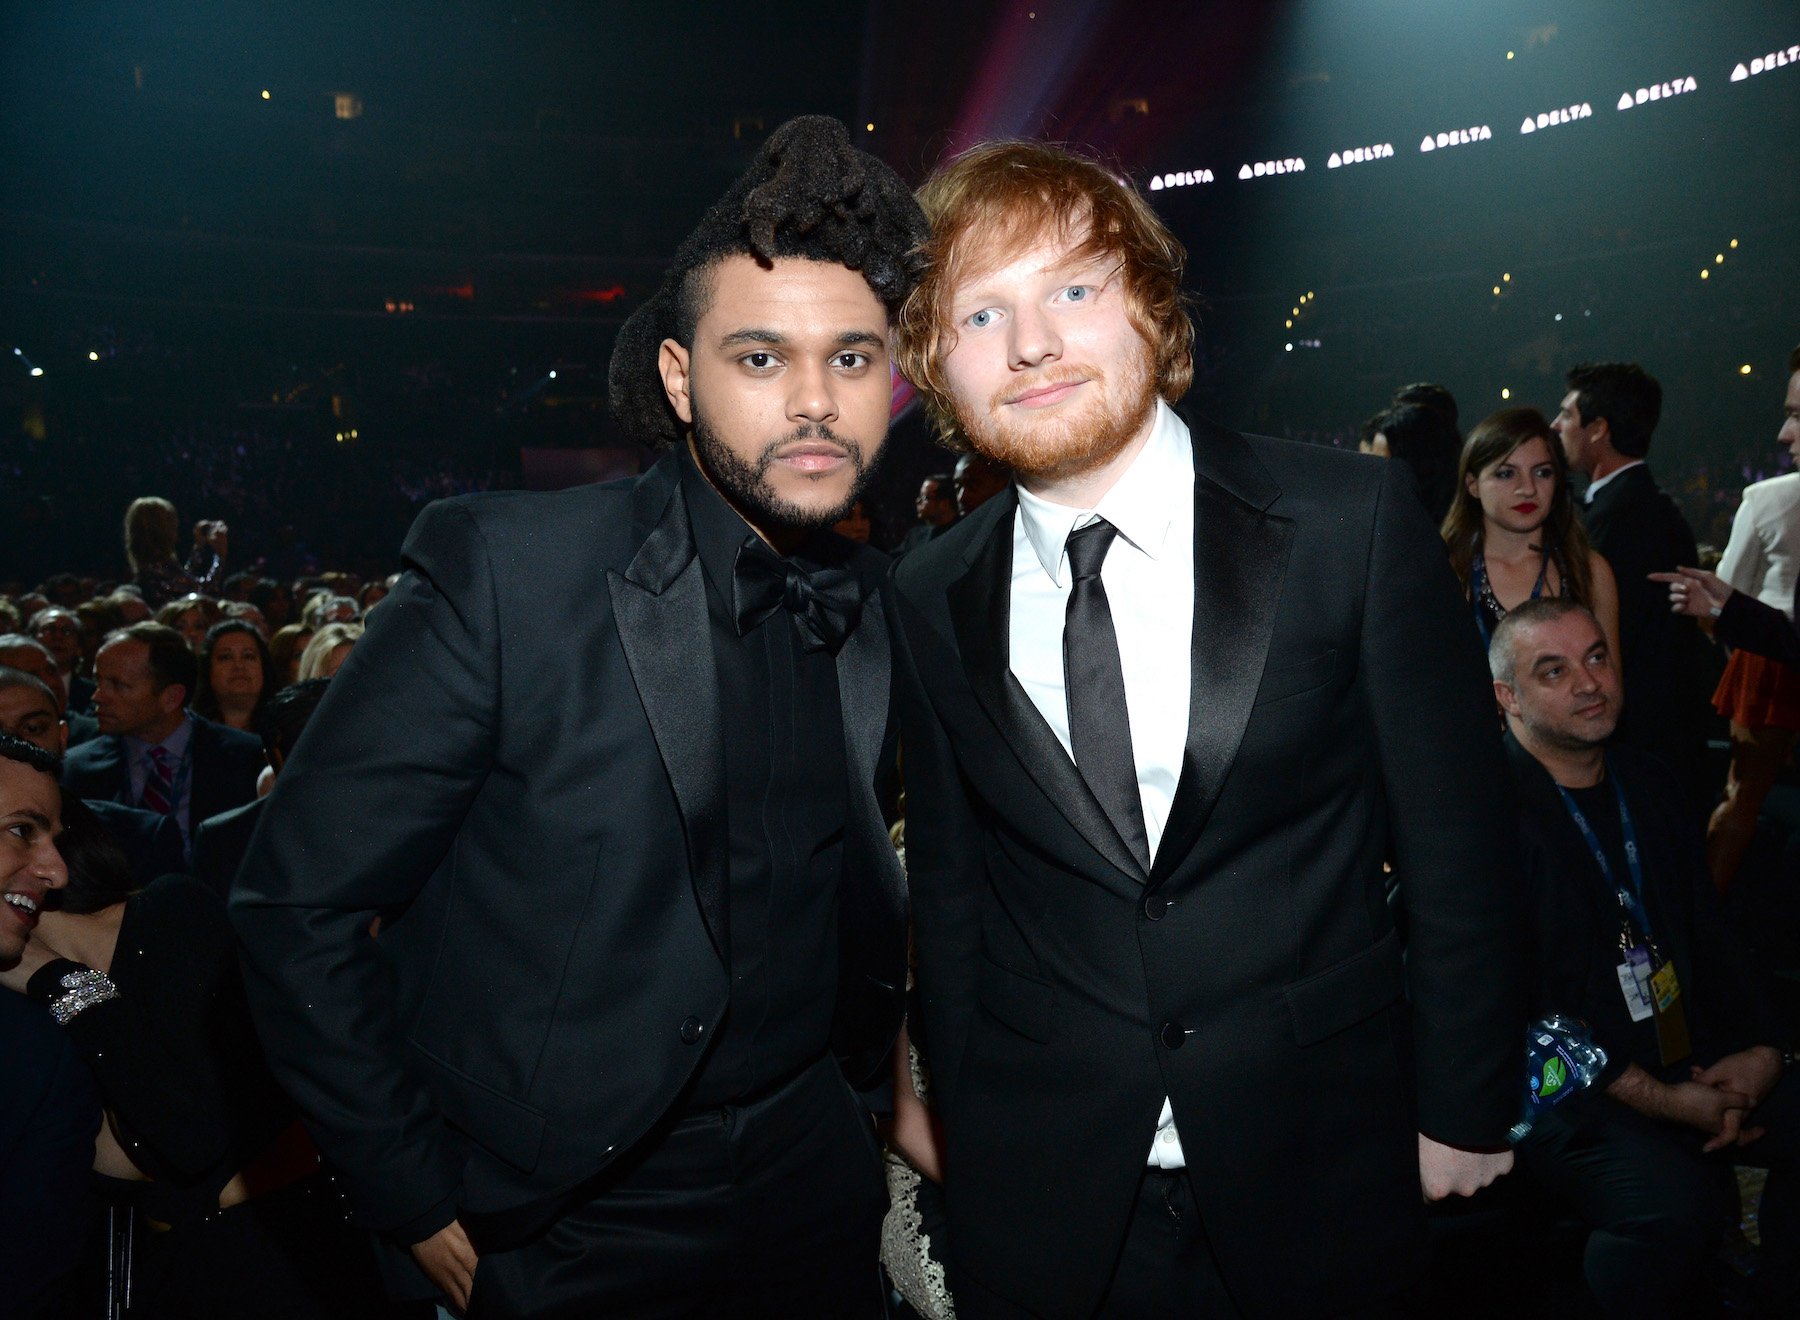 The Weeknd and Ed Sheeran, singers of the two most-streamed songs on Spotify, posing for a photo together